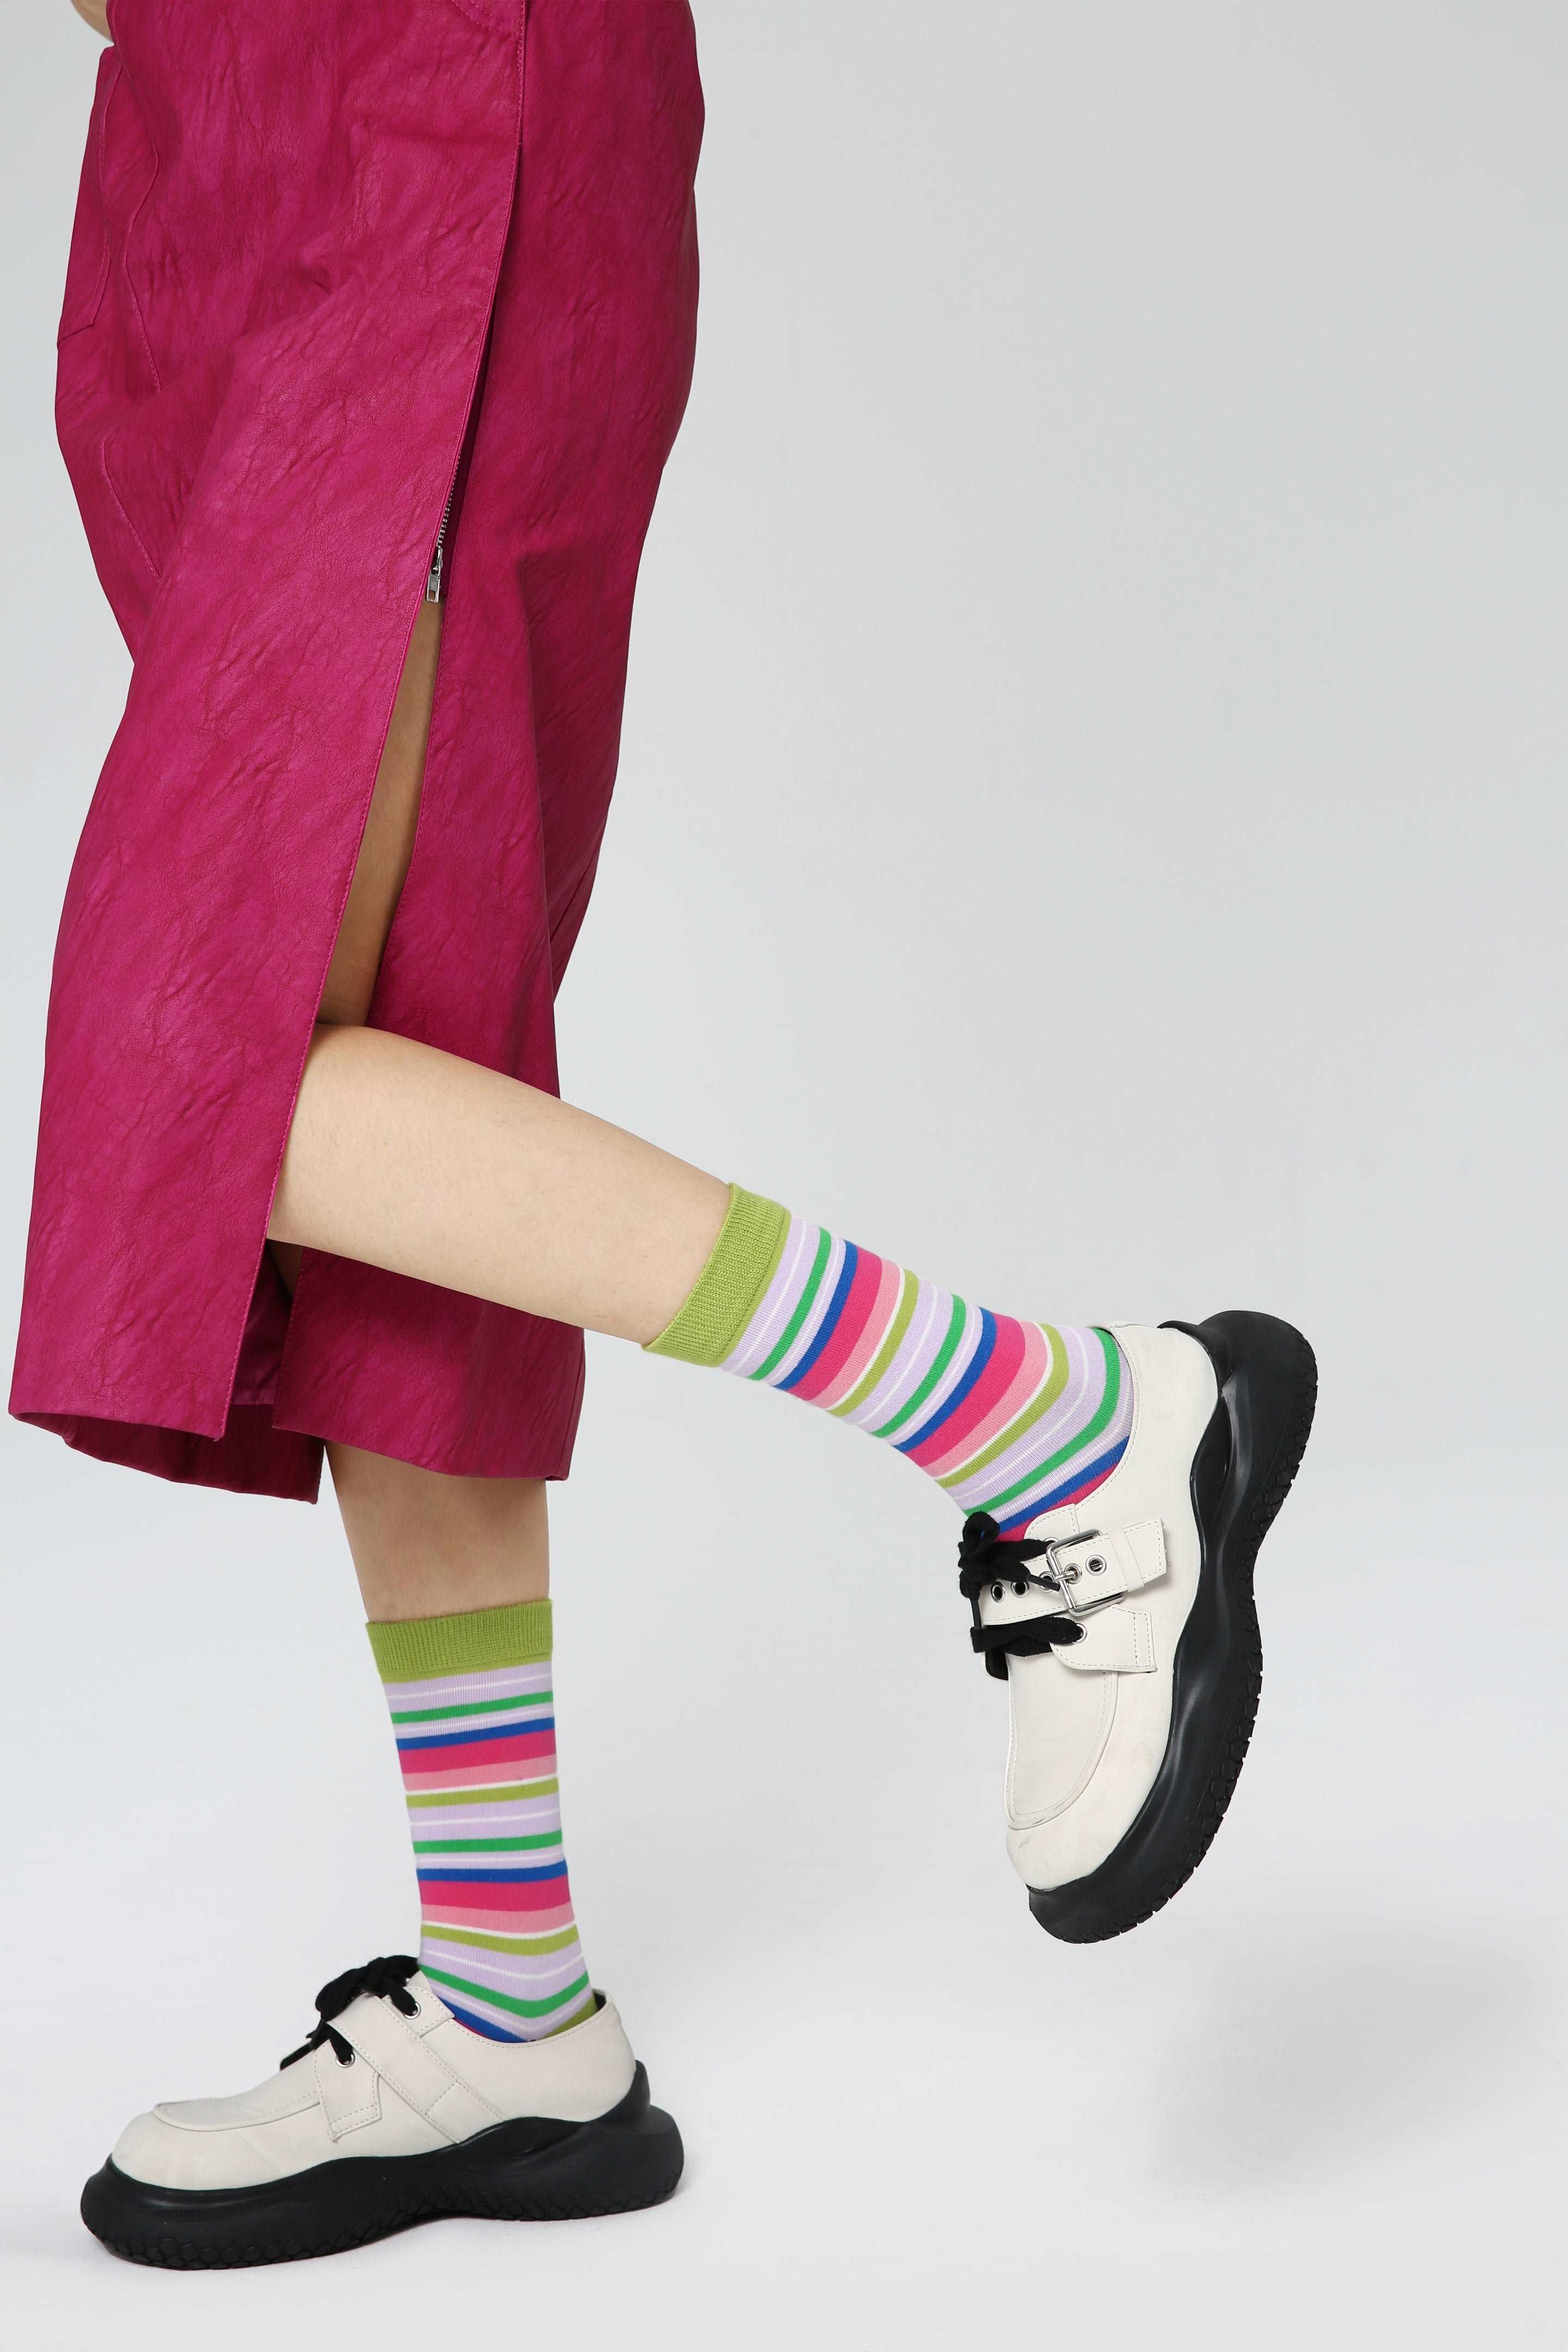 Woman's feet adorned with multicolored socks complementing her pink skirt